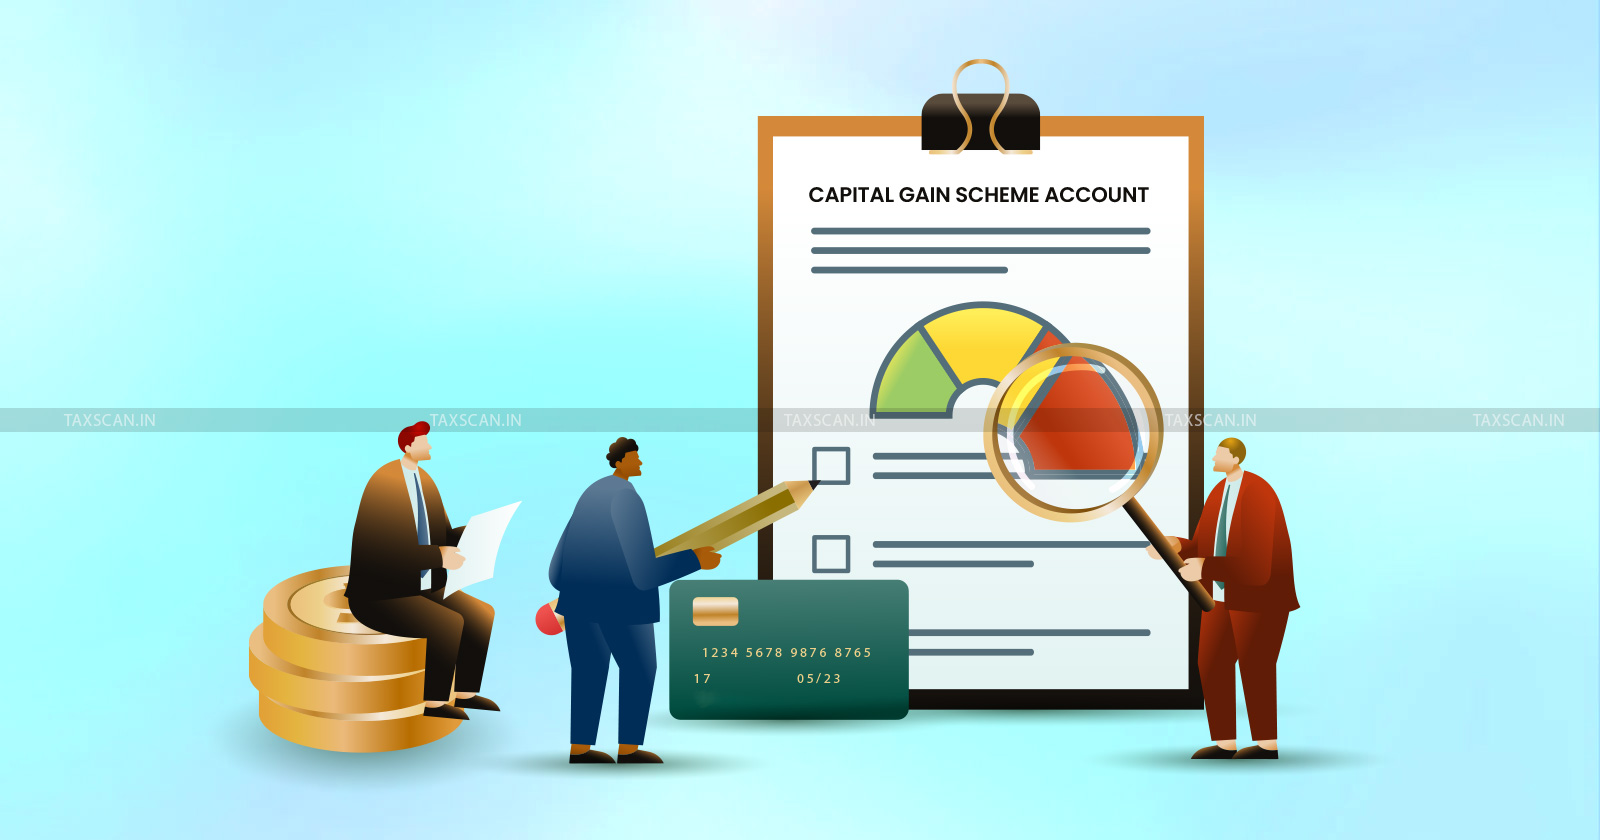 Advance Payment for Purchase of Land - Deposit in Capital Gain Scheme Account Established - Advance Payment - TAXSCAN